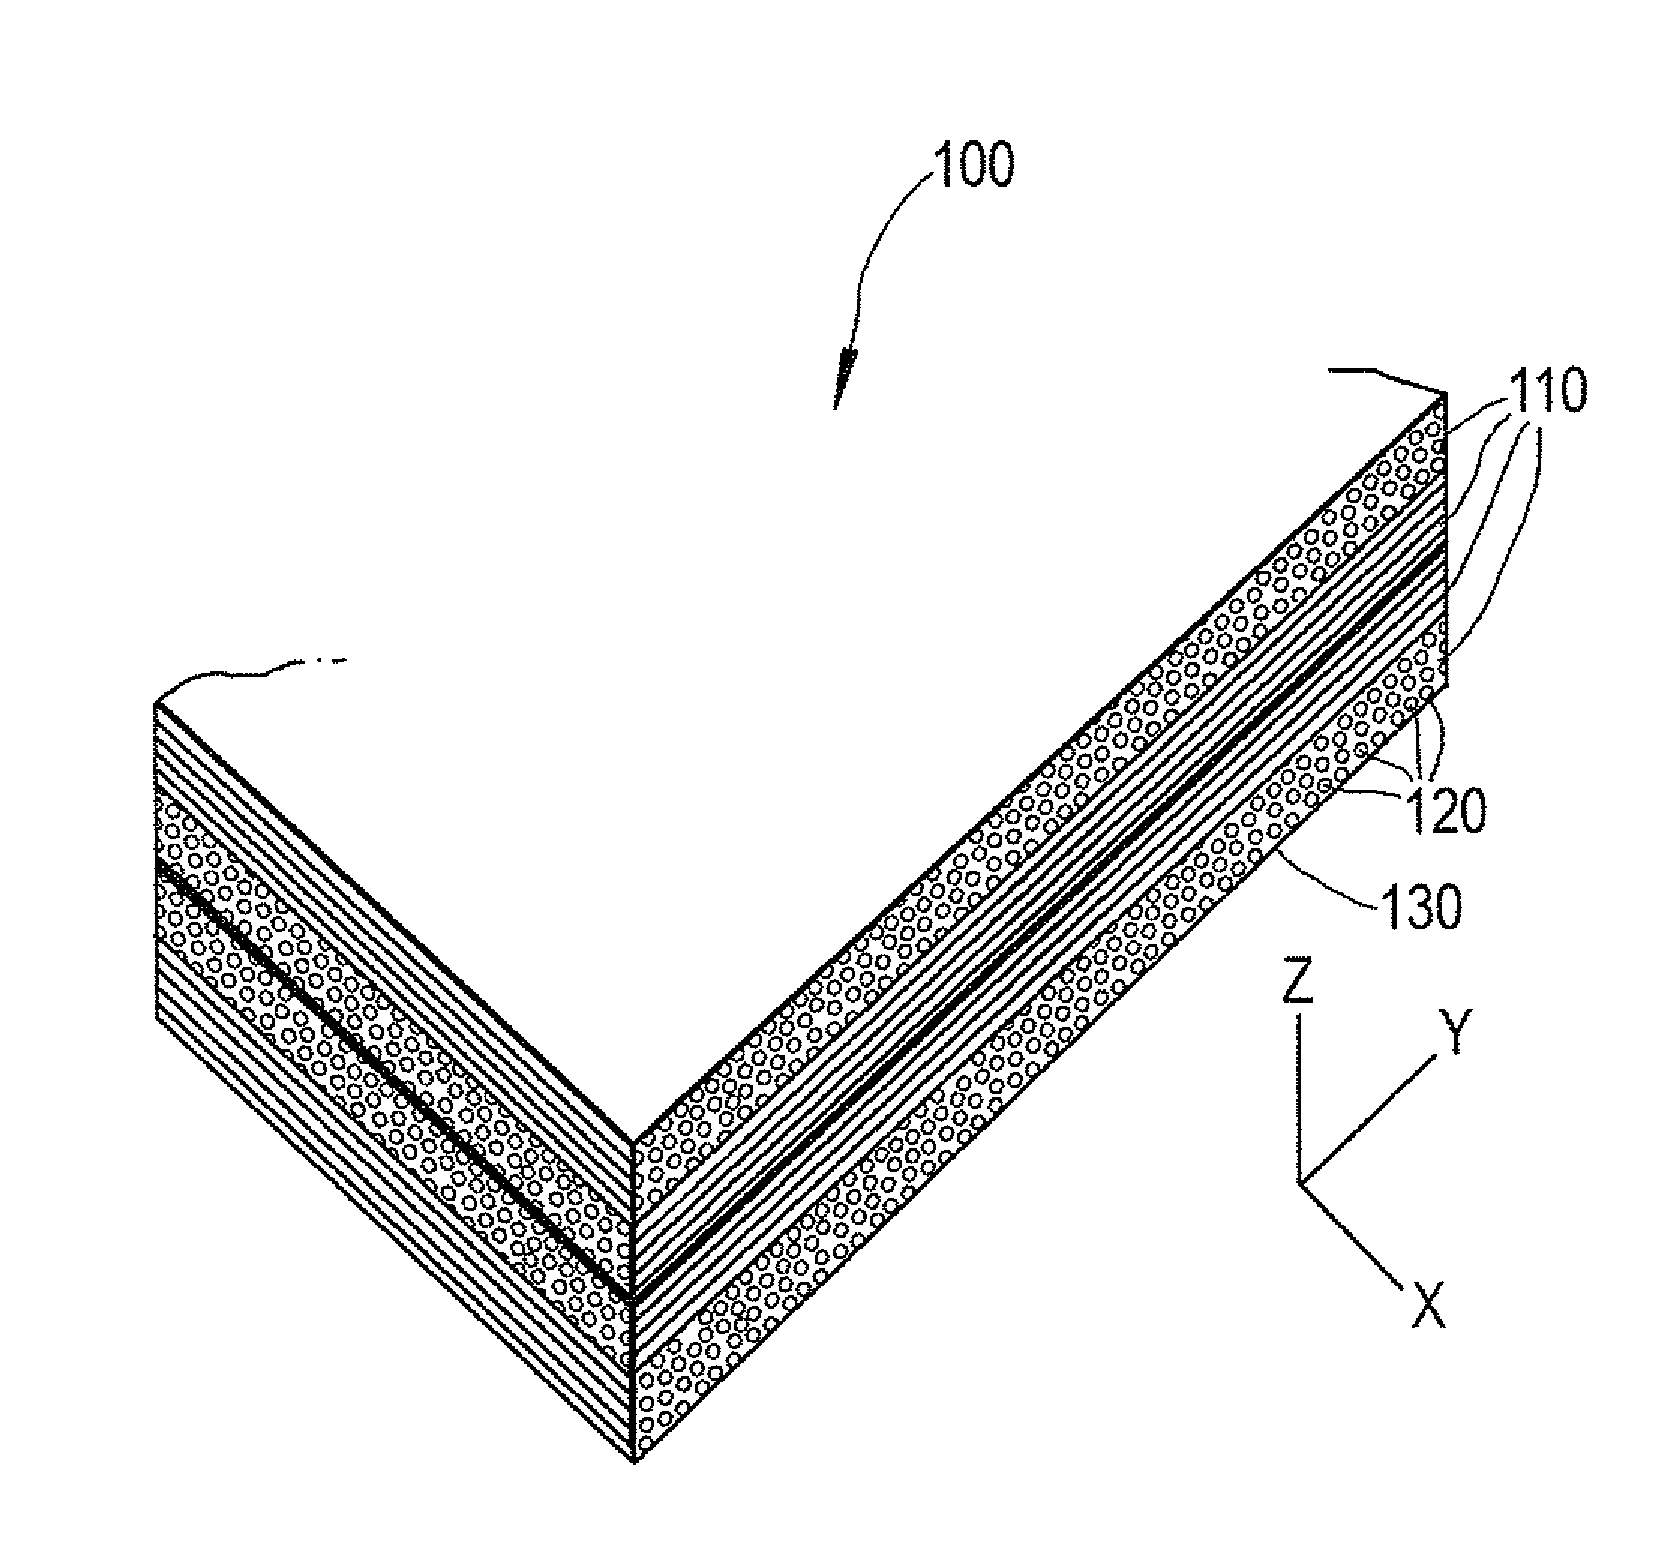 Method of providing through-thickness reinforcement of a laminated material